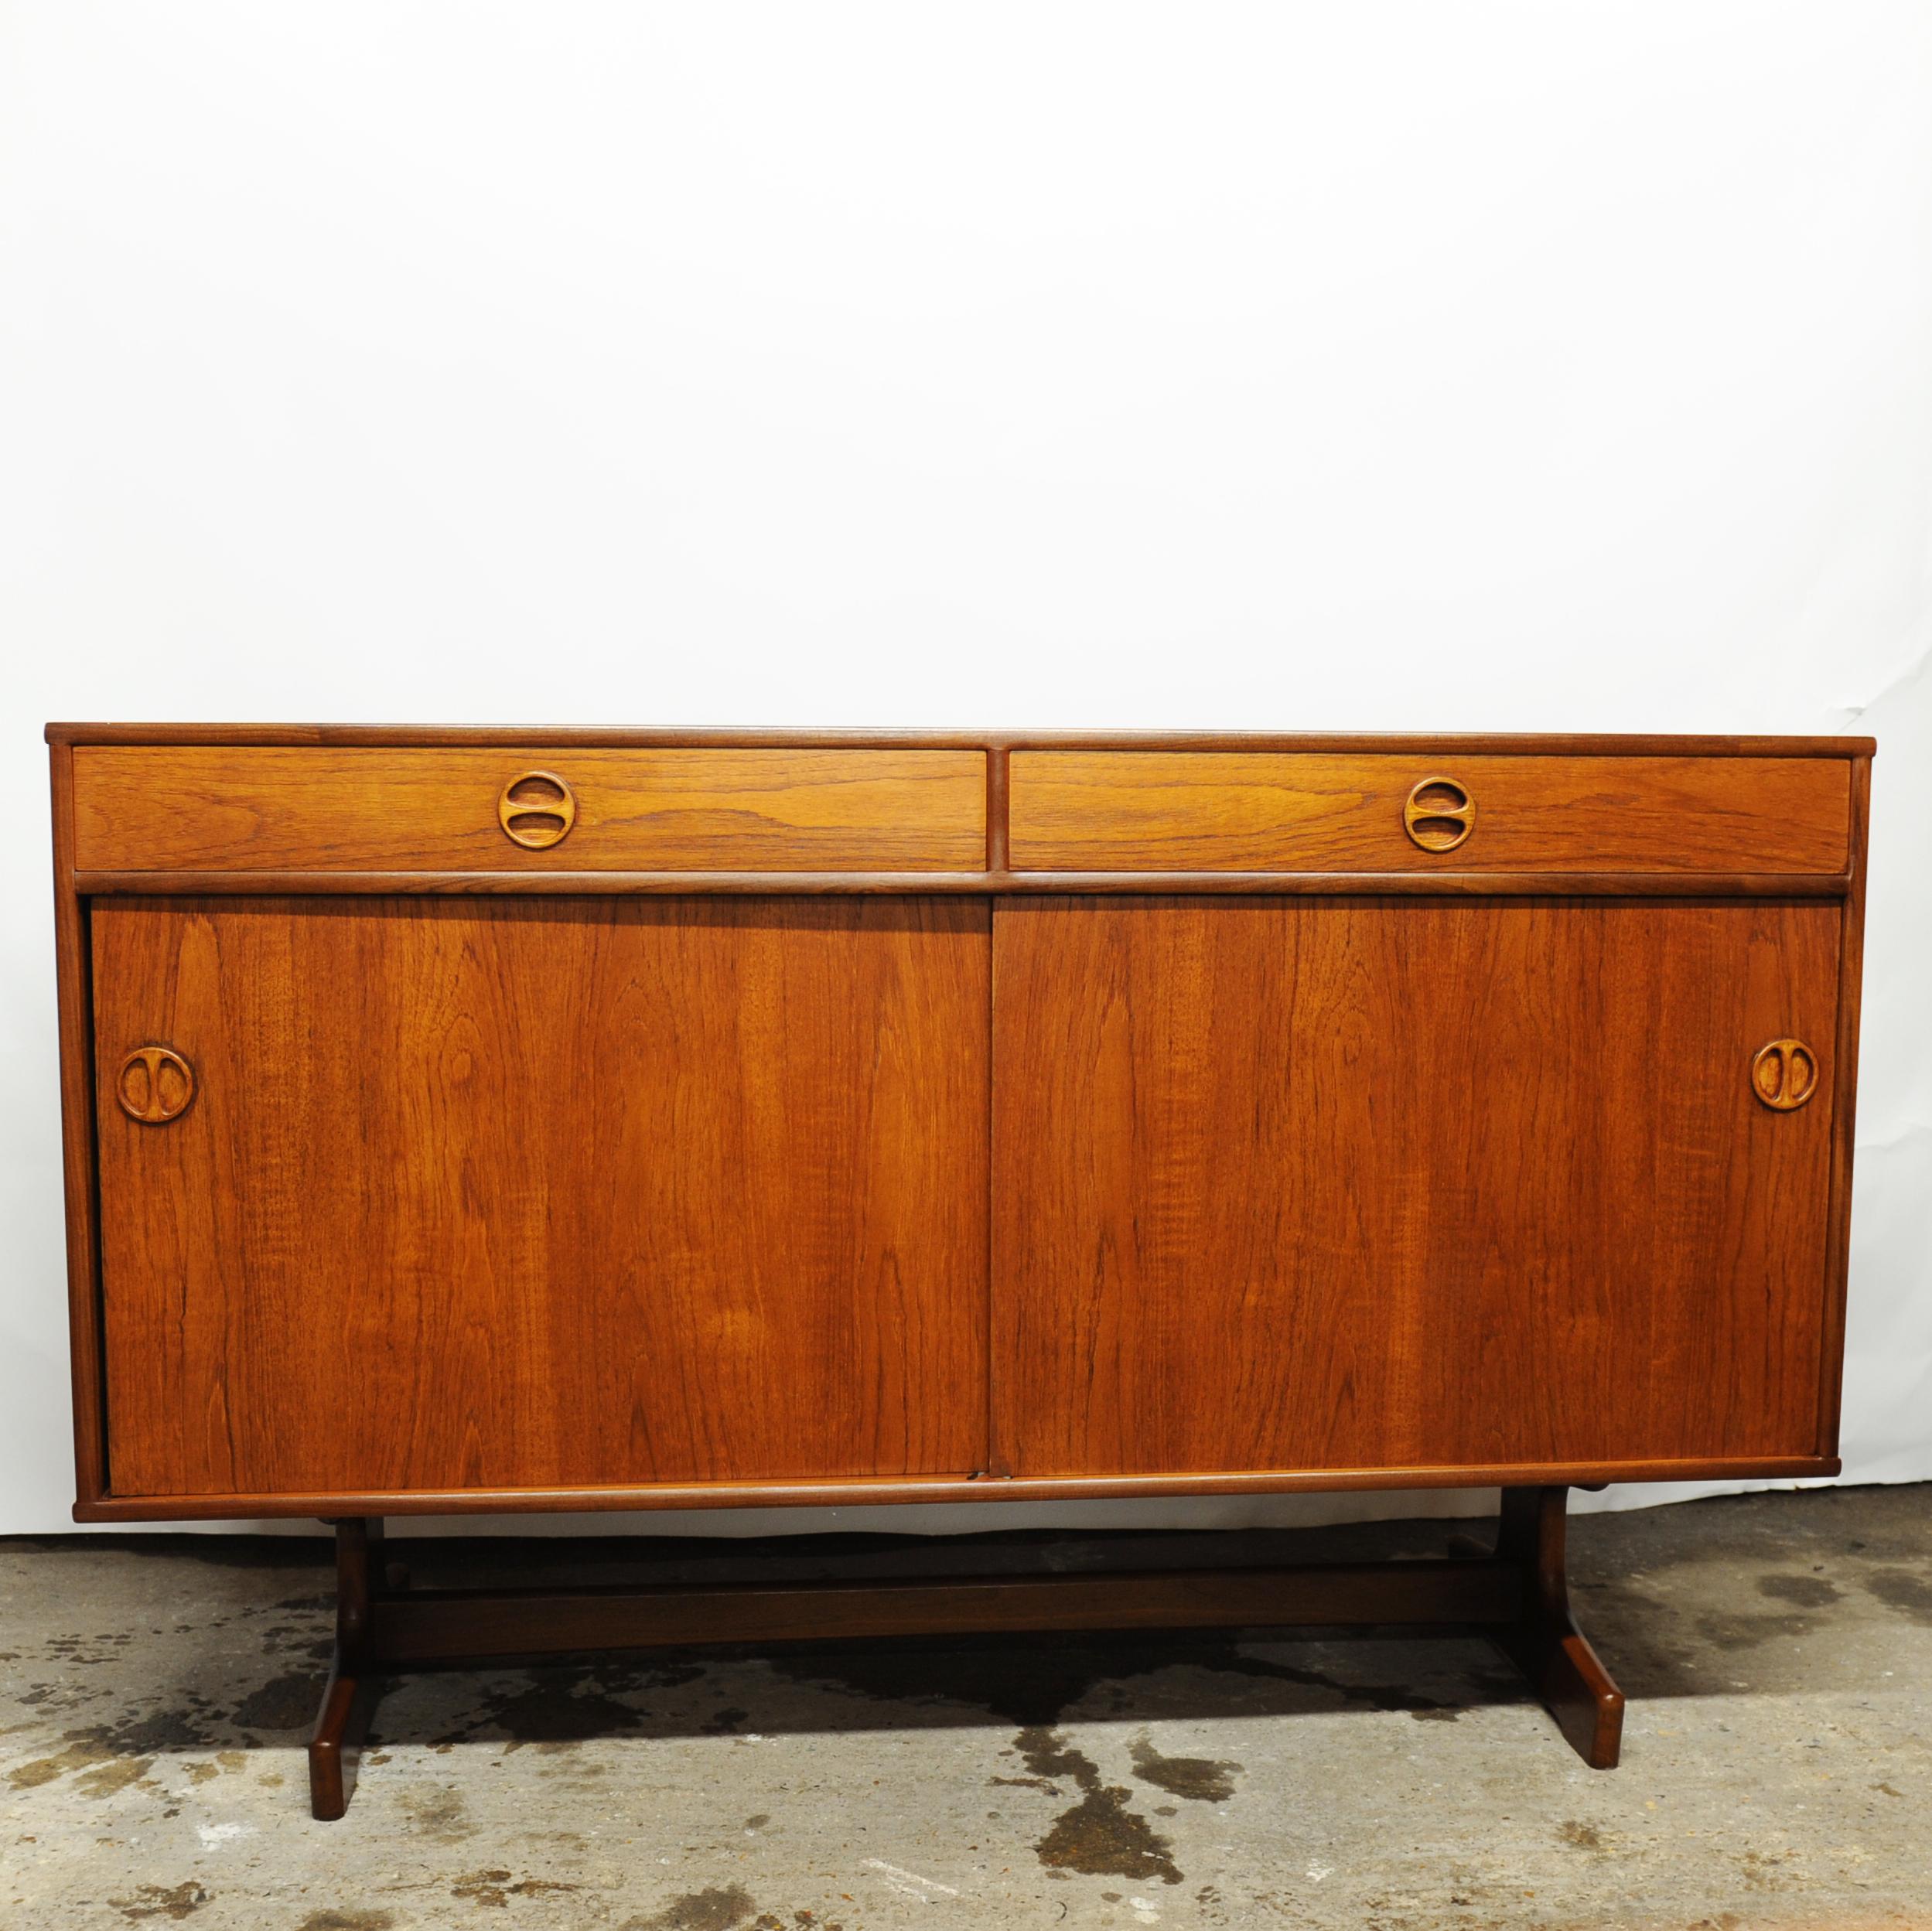 Vintage Teak Short Sideboard with Circular Handles, 1970s In Good Condition For Sale In Chesham, GB